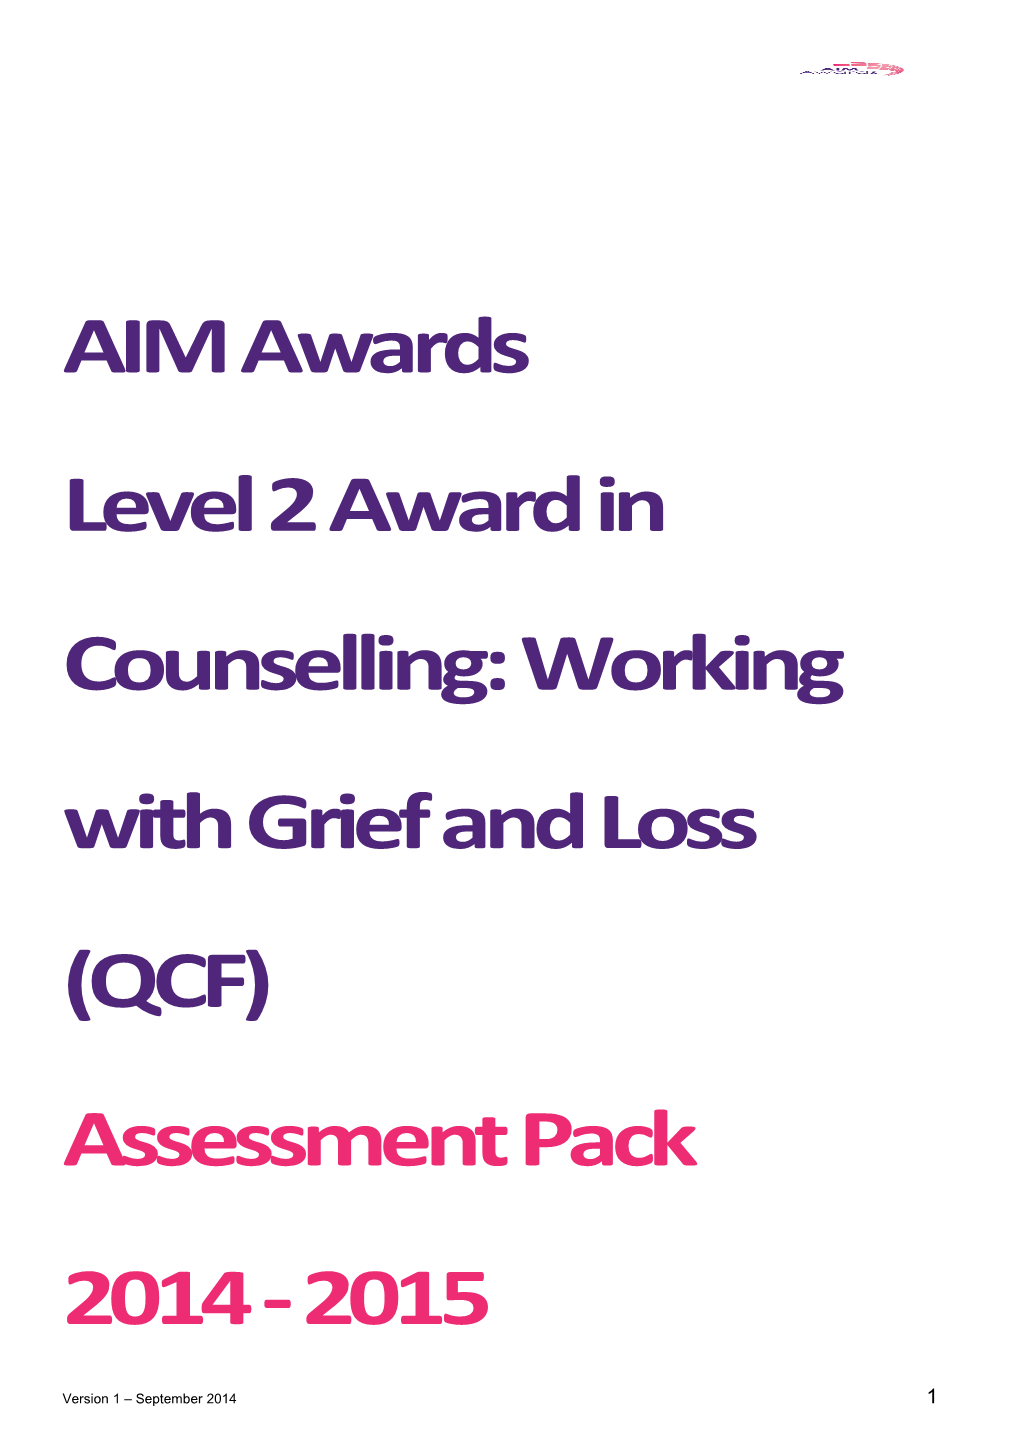 Level 2 Award in Counselling: Working with Grief and Loss (QCF)